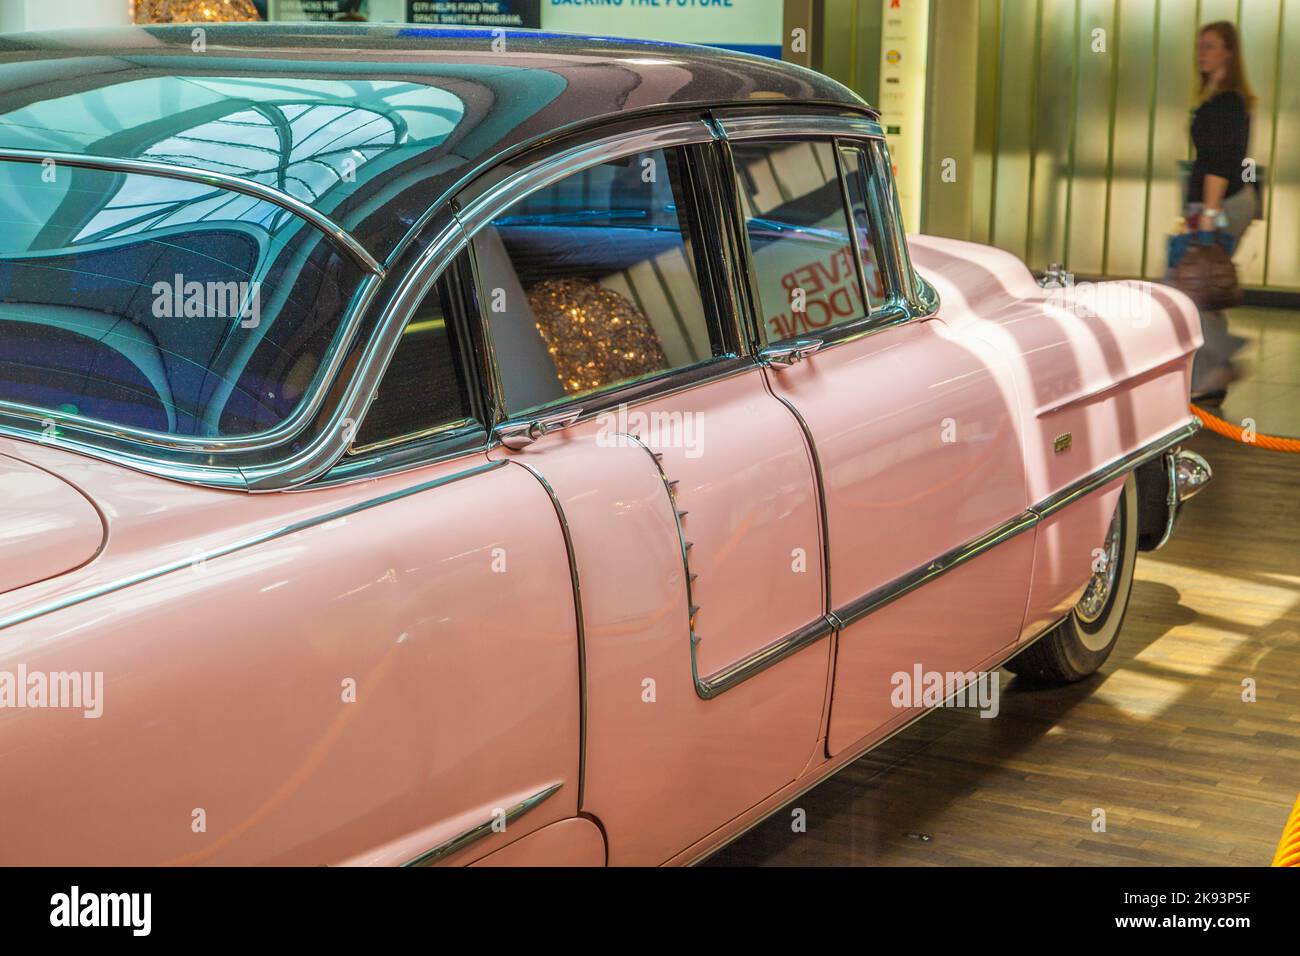 FRANKFURT, GERMANY - JUNE 8:  pink 1956 Cadillac at the airport on June 8, 2012 in Frankfurt, Germany. It belongs to the museum of Sinsheim with more Stock Photo